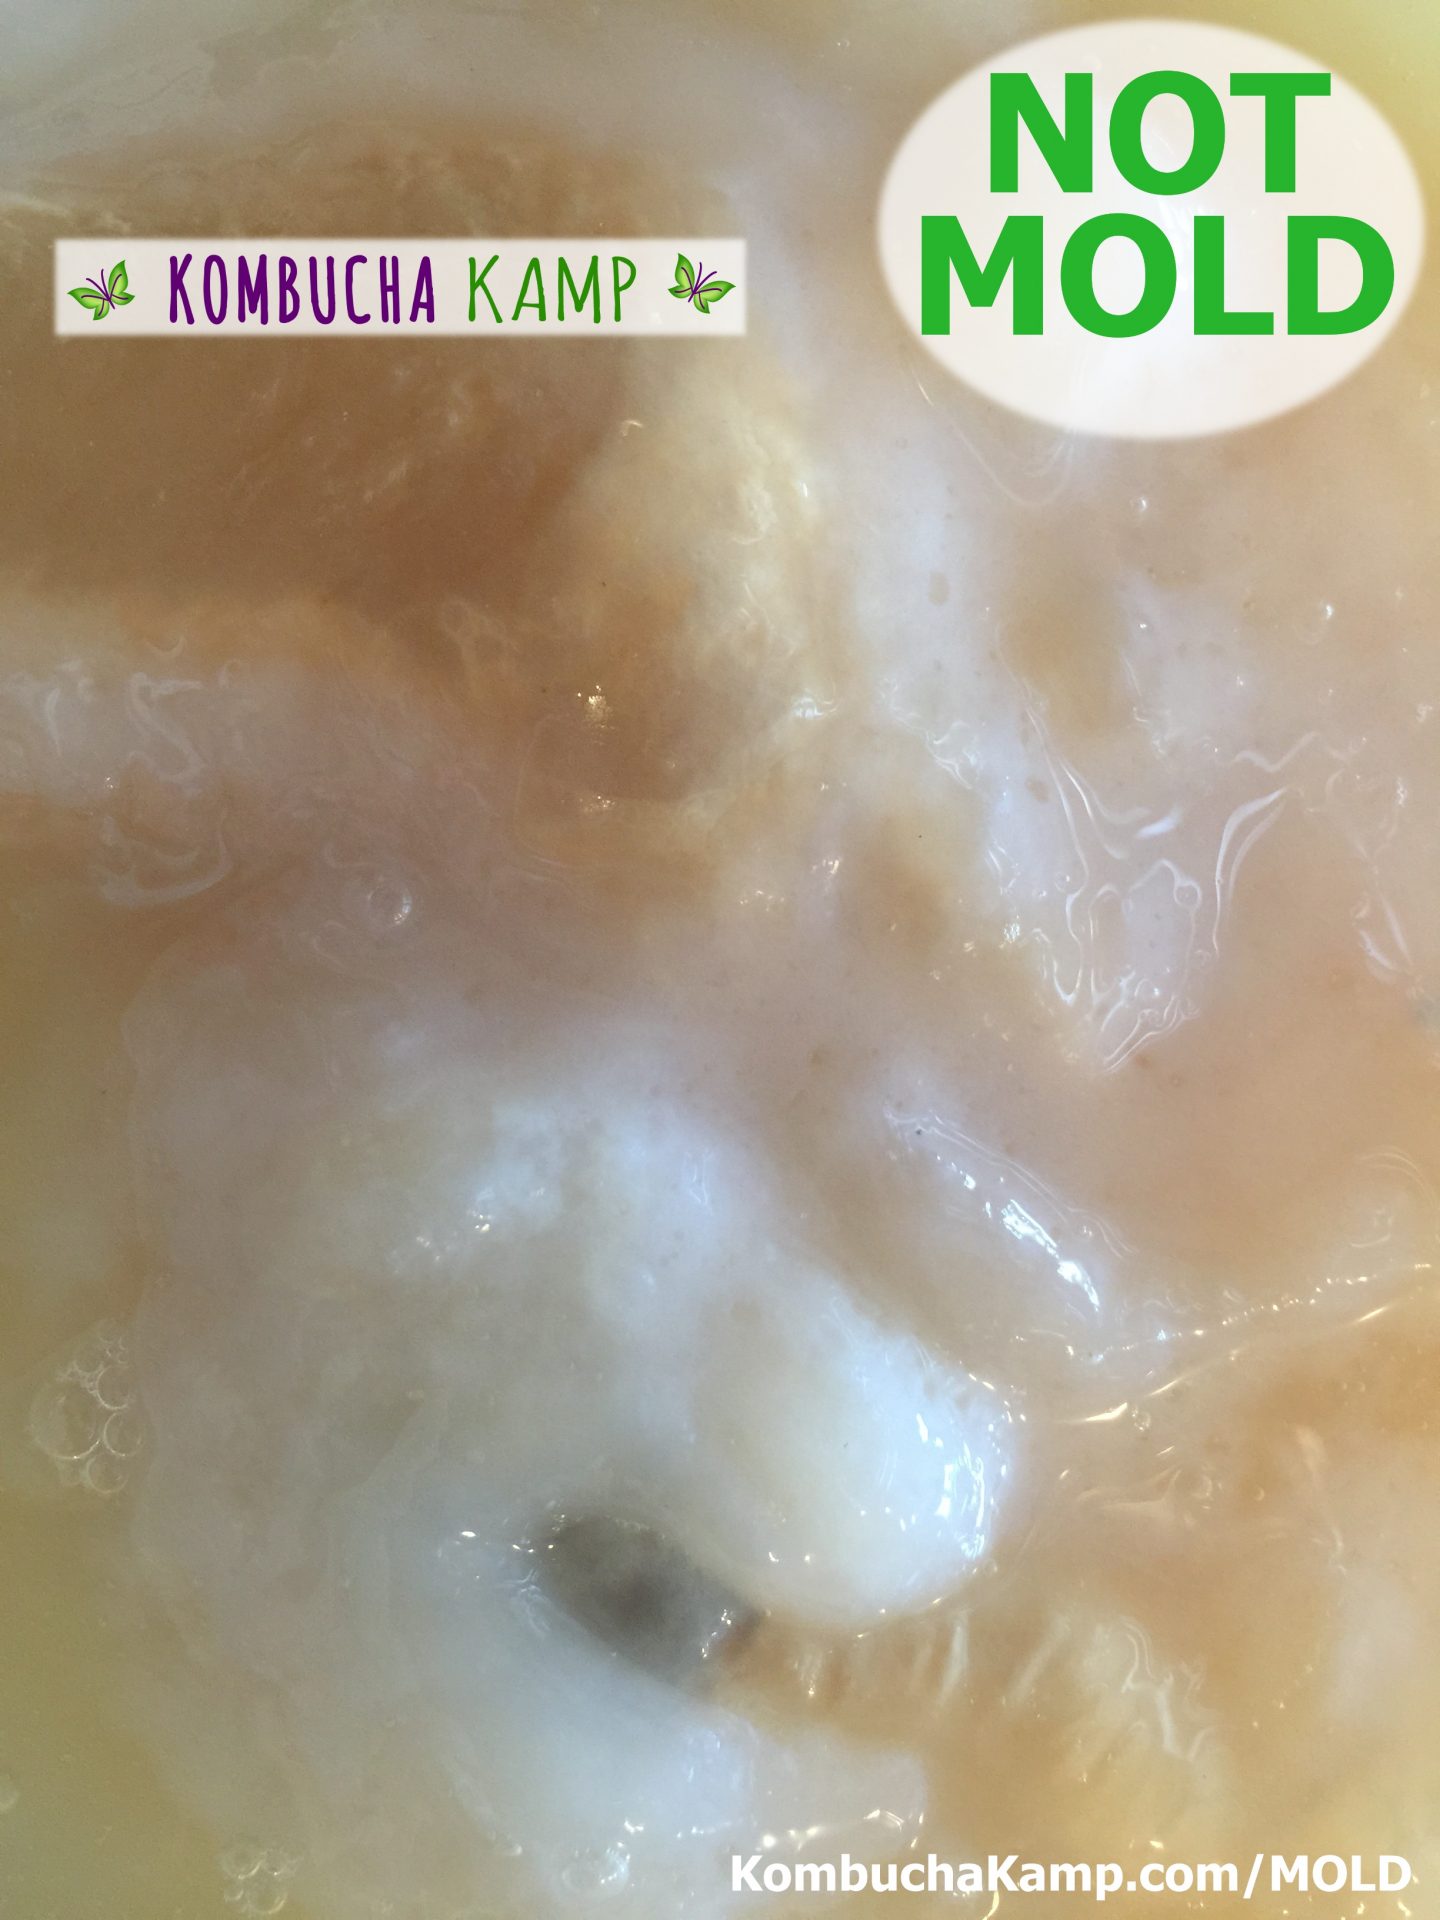 A small bluish pocket of yeast appears trapped underneath new Kombucha SCOBY growth not mold on Kombucha